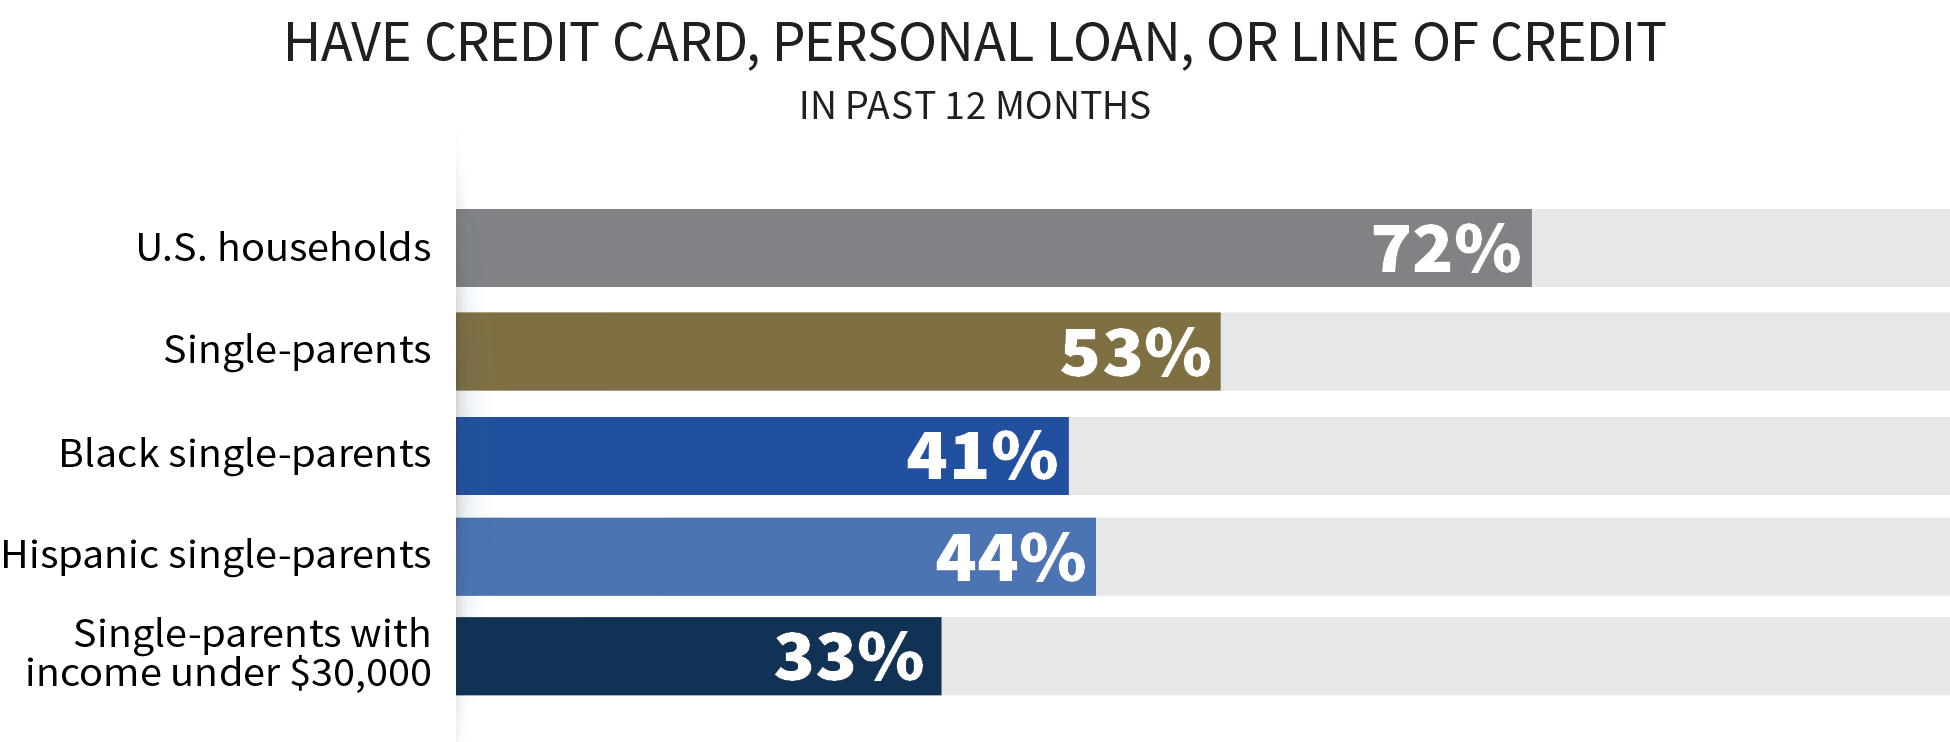 Graph for 'Have Credit Card, Personal Loan, or Line of Credit' for: U.S. households is 72%; Single-parents is 50%; Black single-parents is 42%; Black single-parents is 41%; Single-parents with income under $30k is 32%;